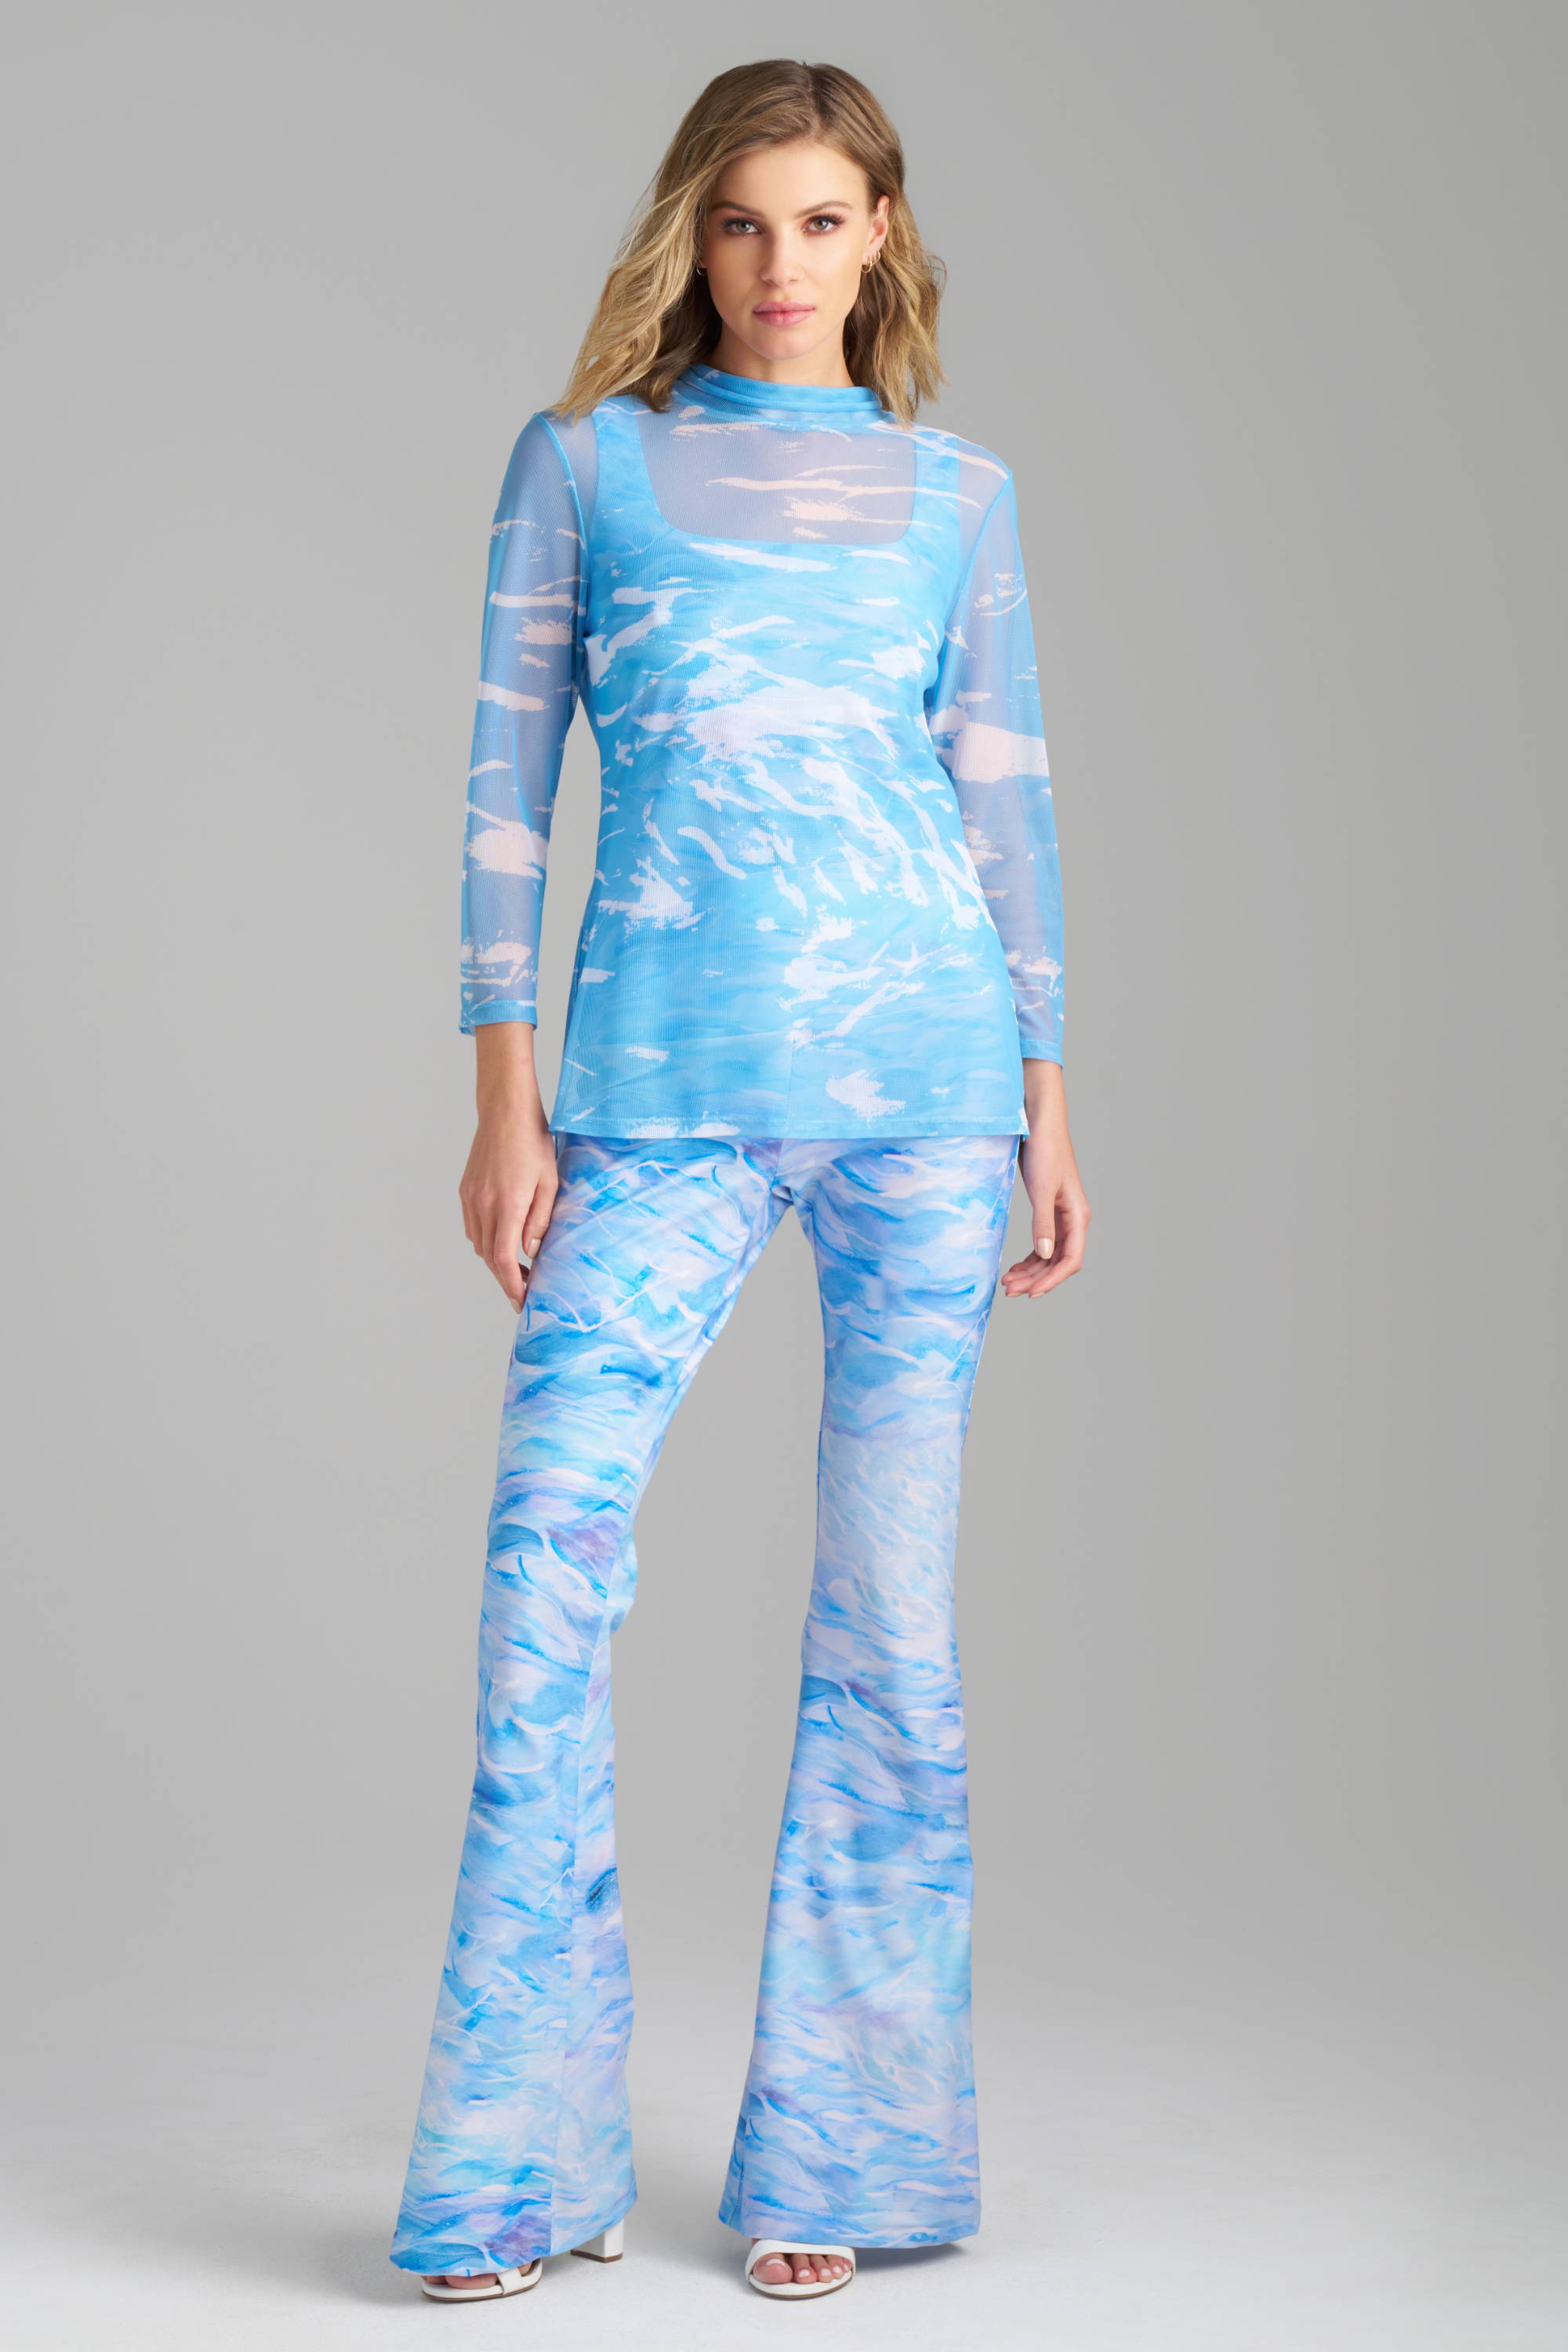 Woman wearing matching blue tank top and pants and mesh cover up set by Ala von Auersperg